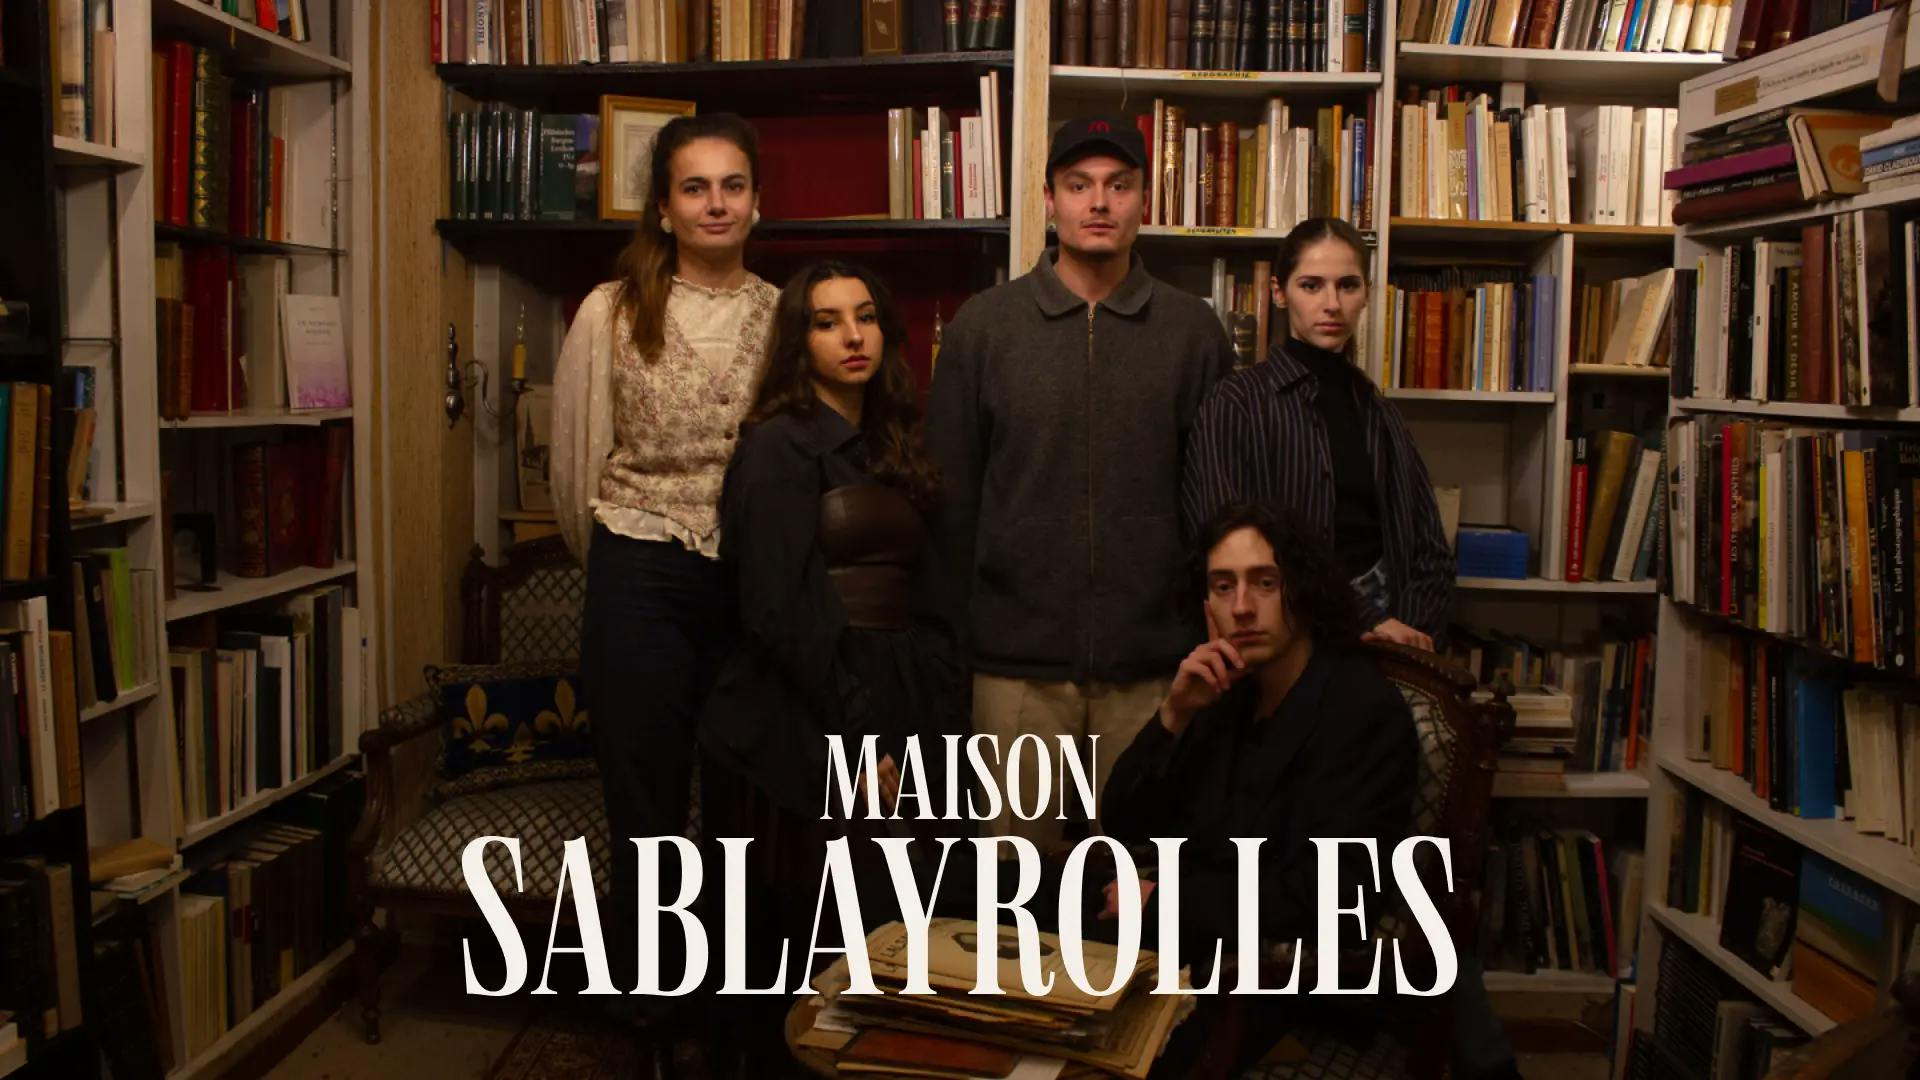 Maison Sablayrolles logo with a photo of the members of the collective